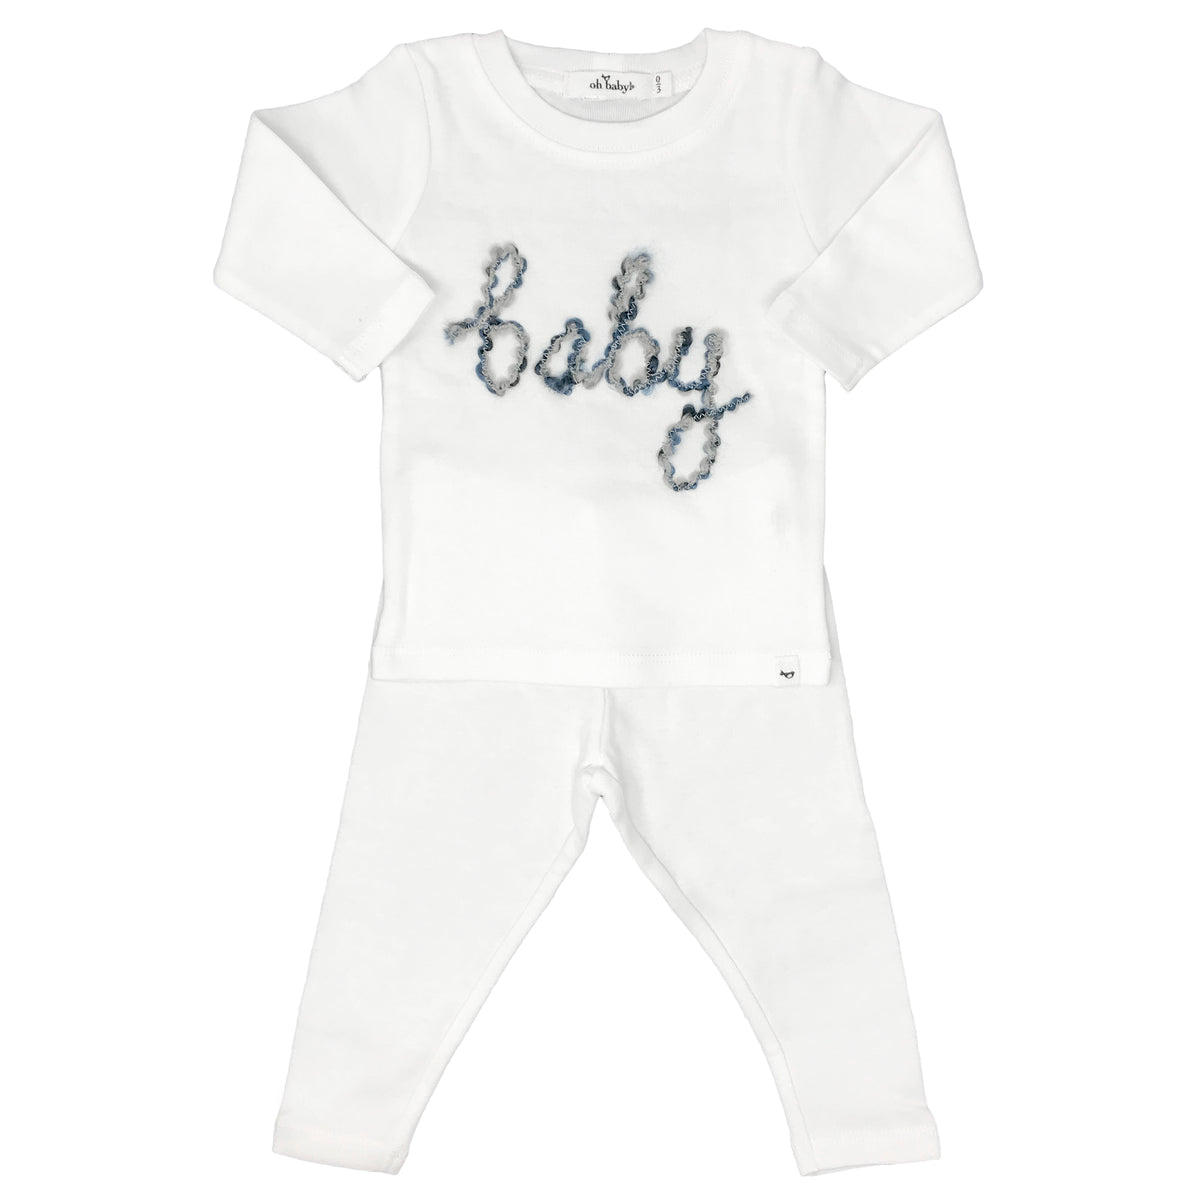 oh baby! Two Piece Set - Baby in Deep Blue Yarn - Cream